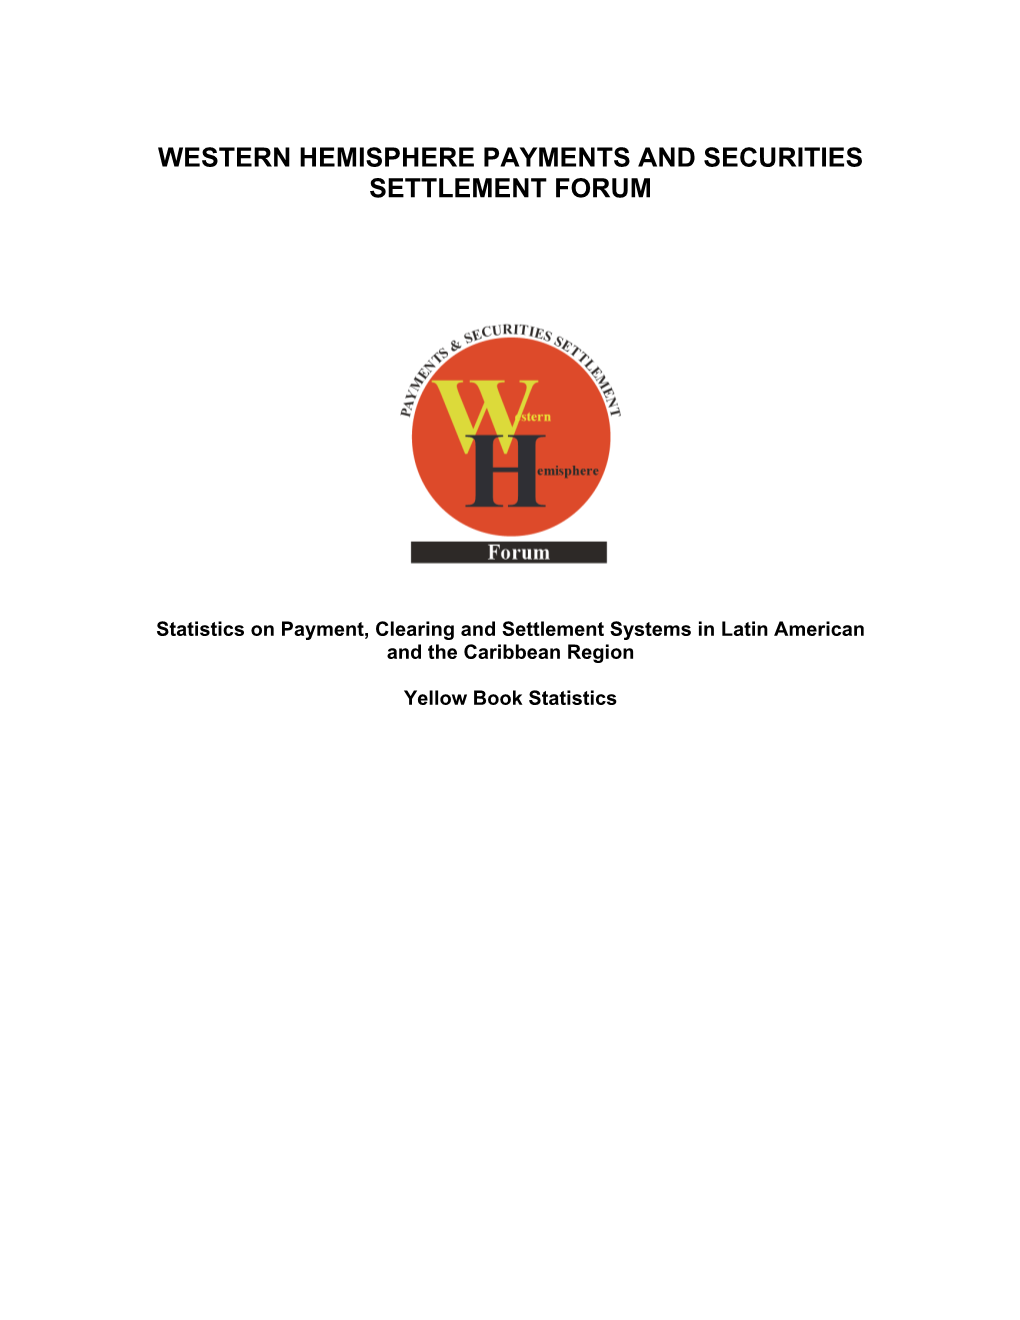 Western Hemisphere Payments and Securities Settlement Forum